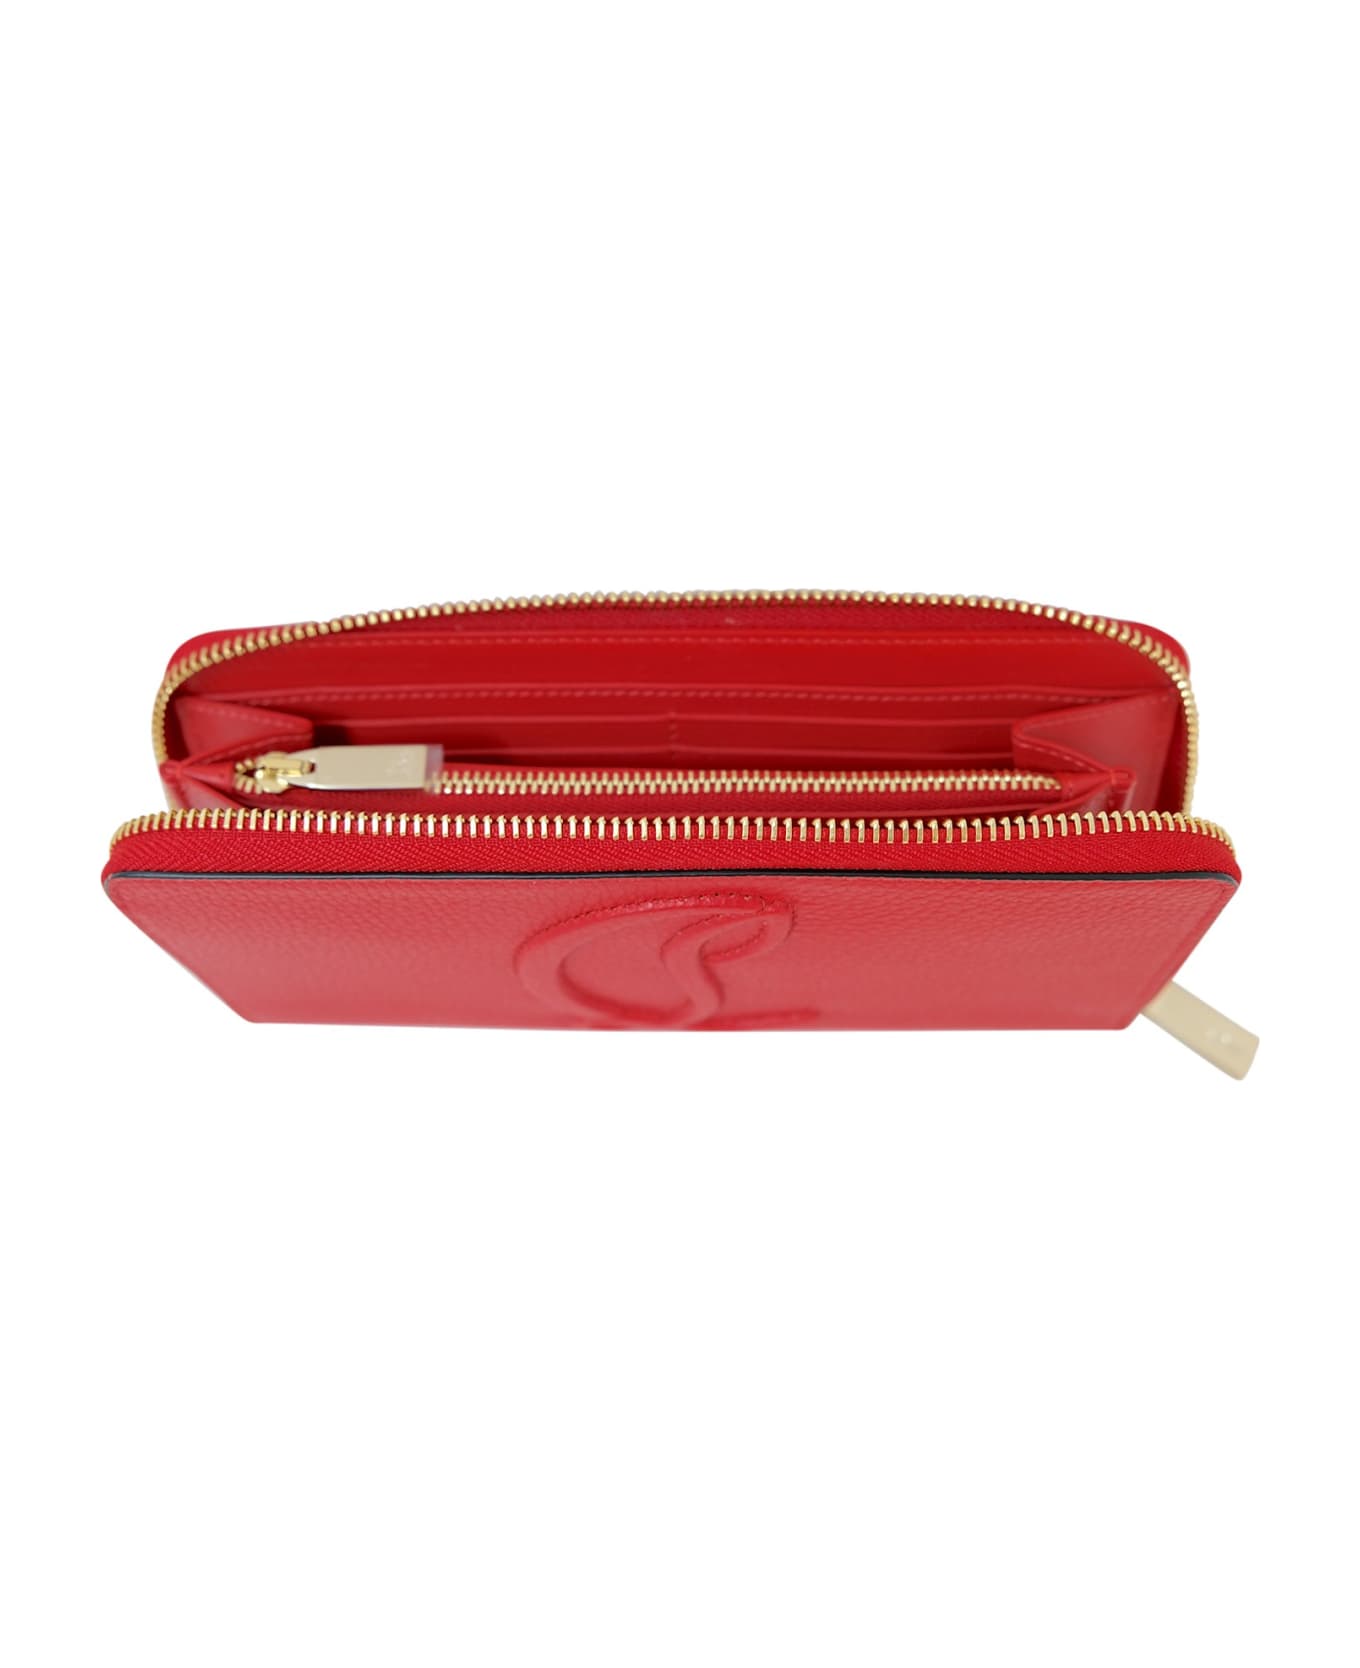 Christian Louboutin By My Side Red Calf Leather Wallet - RED